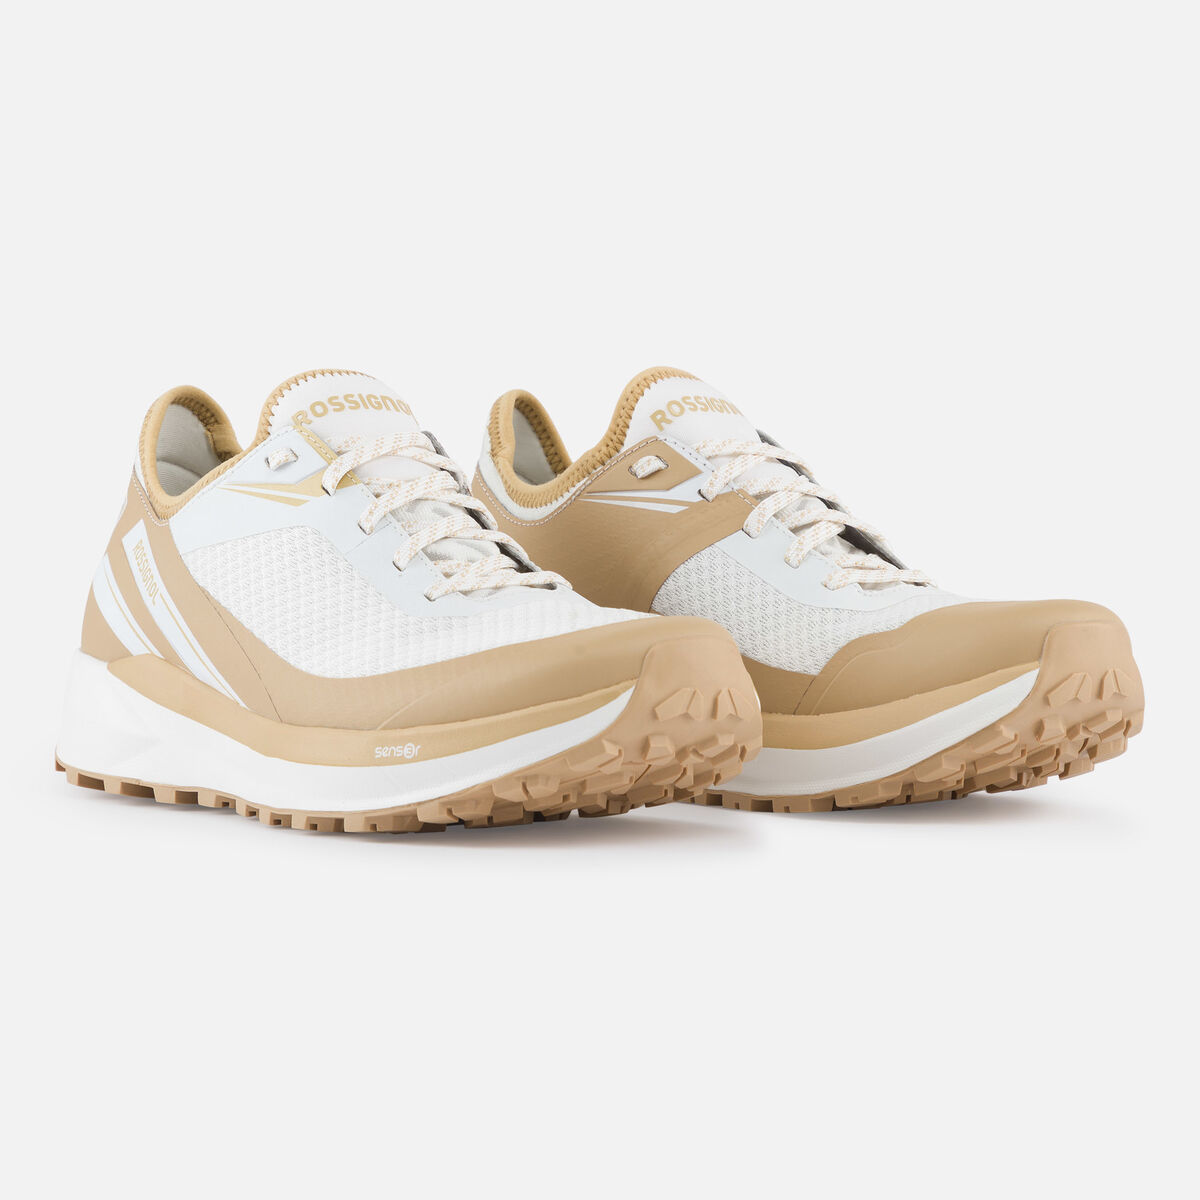 Chaussures Active outdoor légères blanches homme